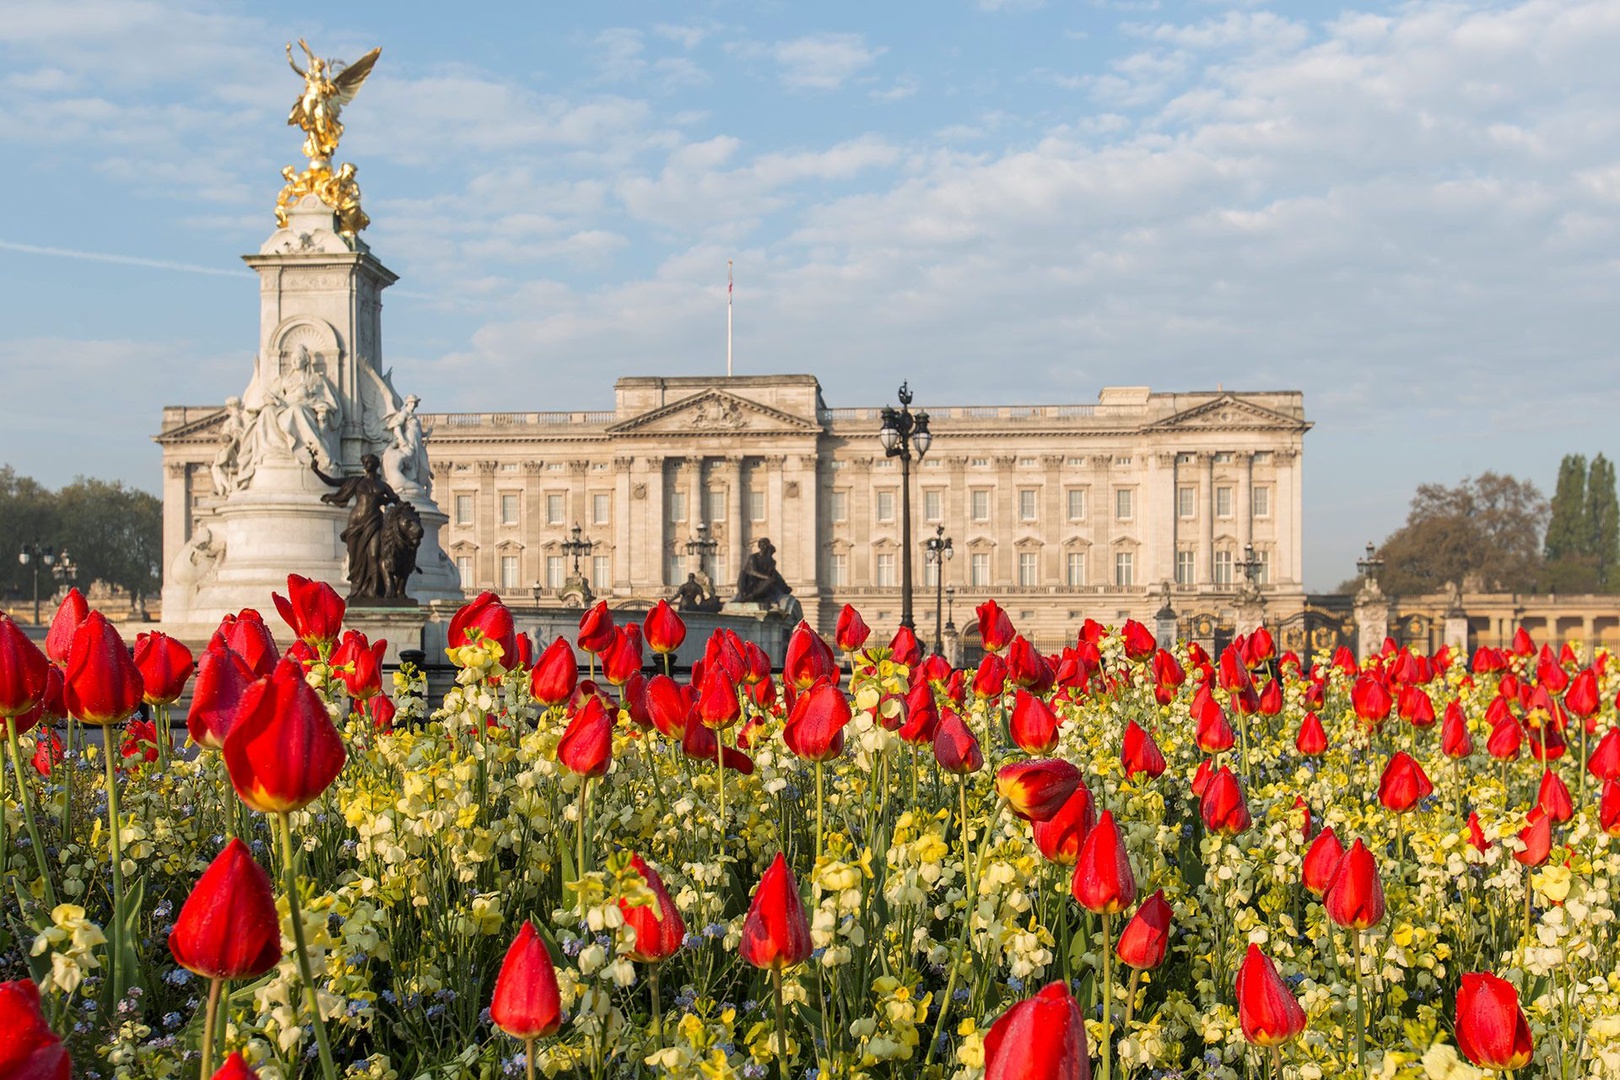 Buckingham Palace is surrounded by beautiful gardens!